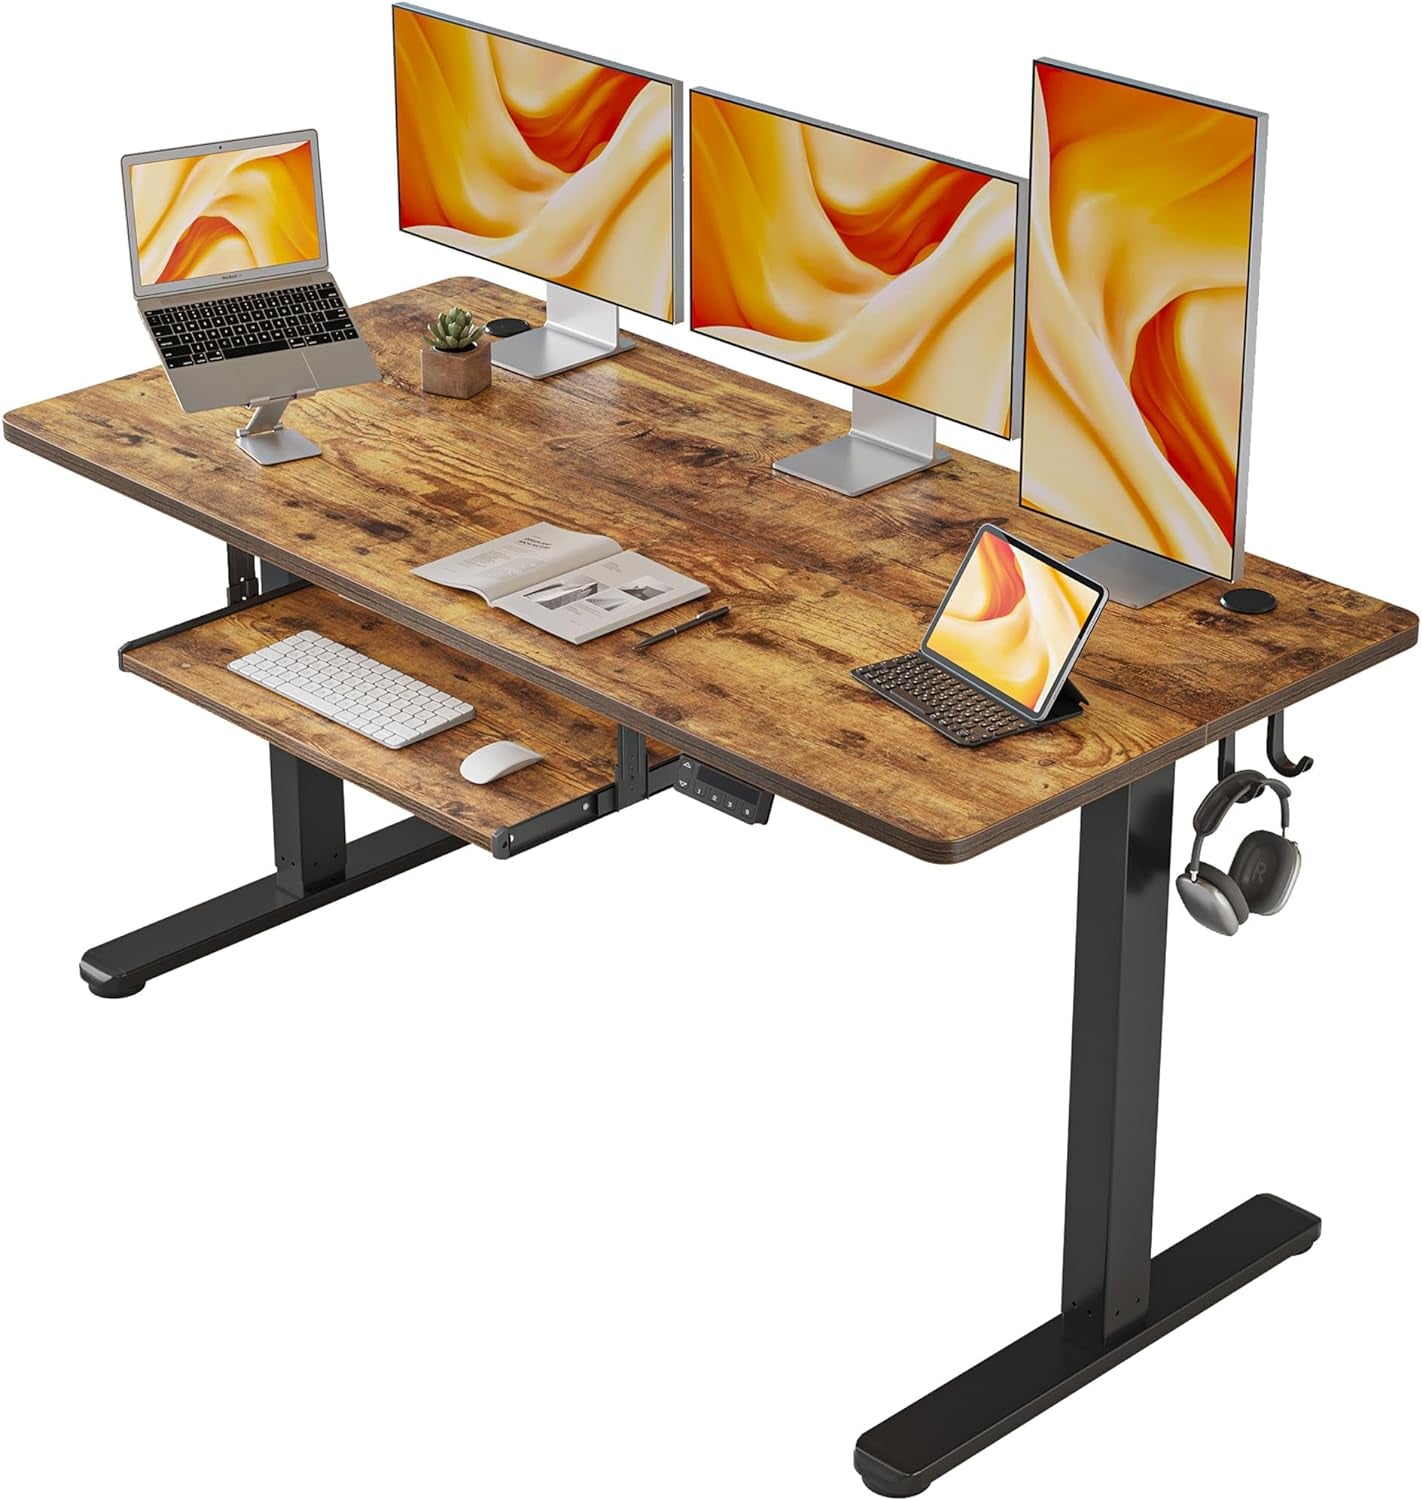 Standing Desk with Keyboard Tray, 55 × 24 Inches Electric Height Adjustable Desk, Sit Stand up Desk, Computer Office Desk, Rustic Brown